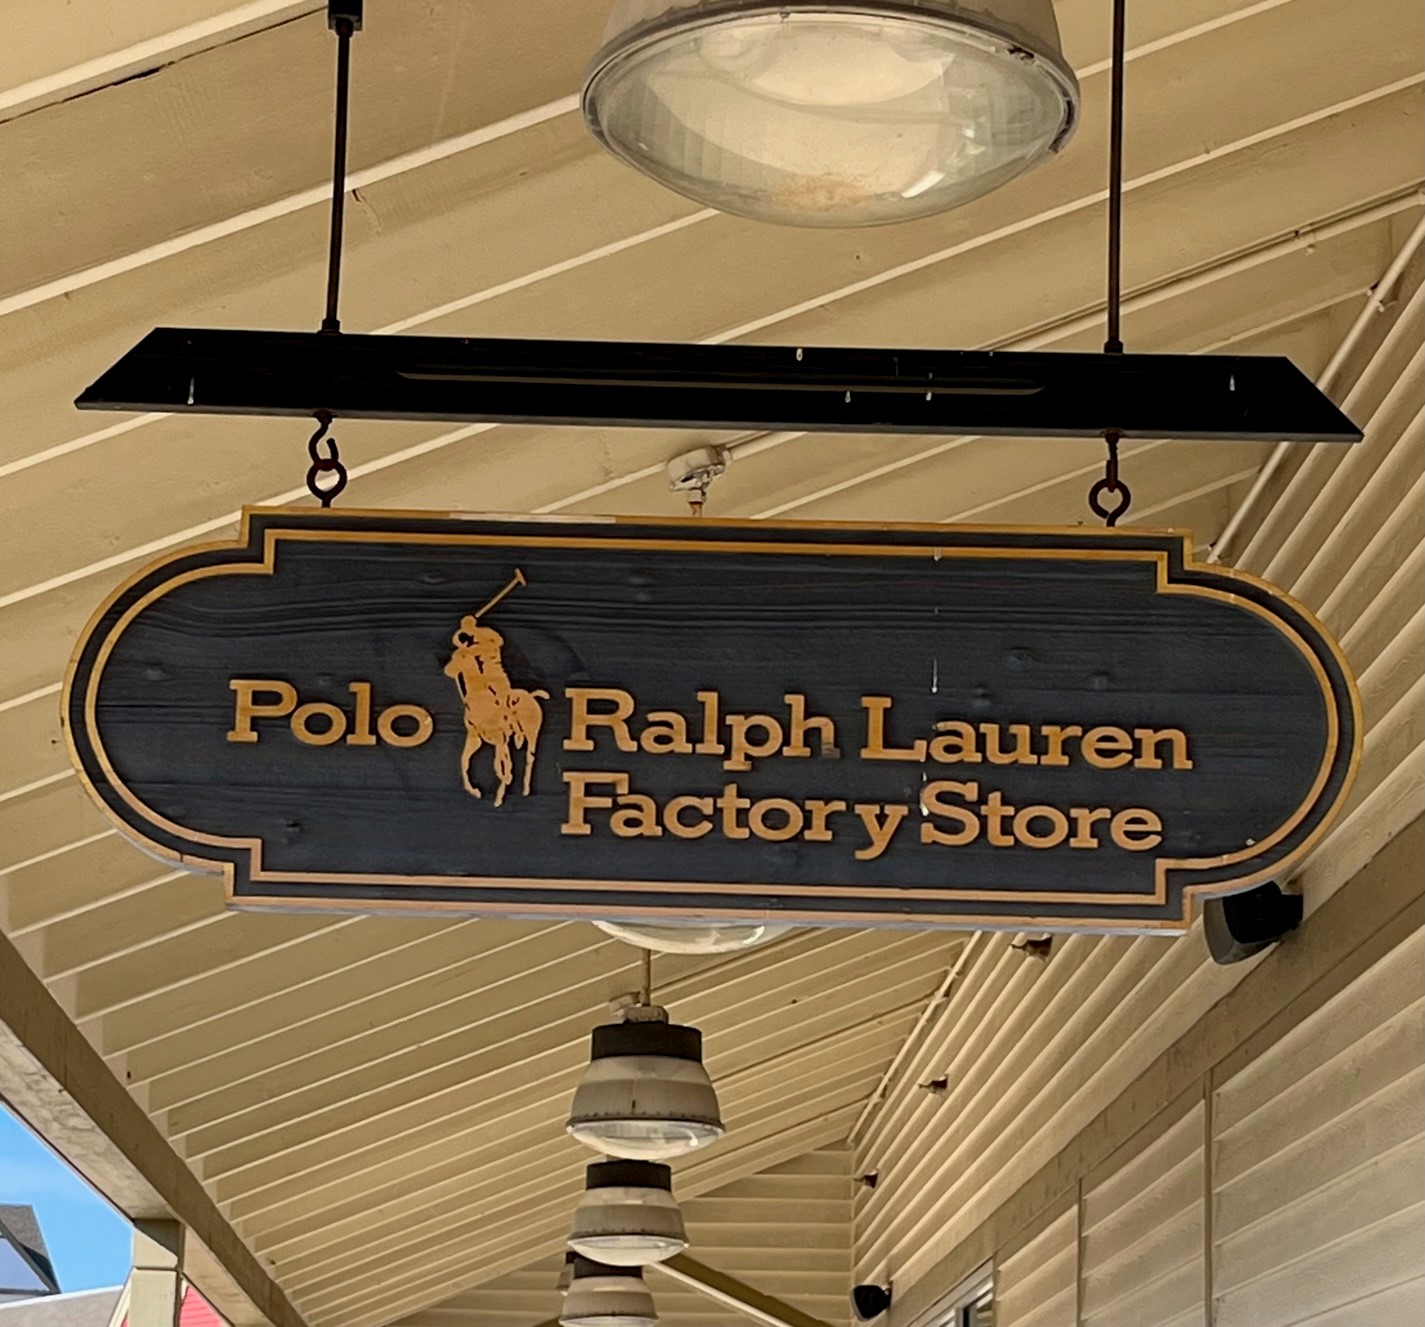 Sign for Polo Ralph Lauren Factory Store in Tuscola.